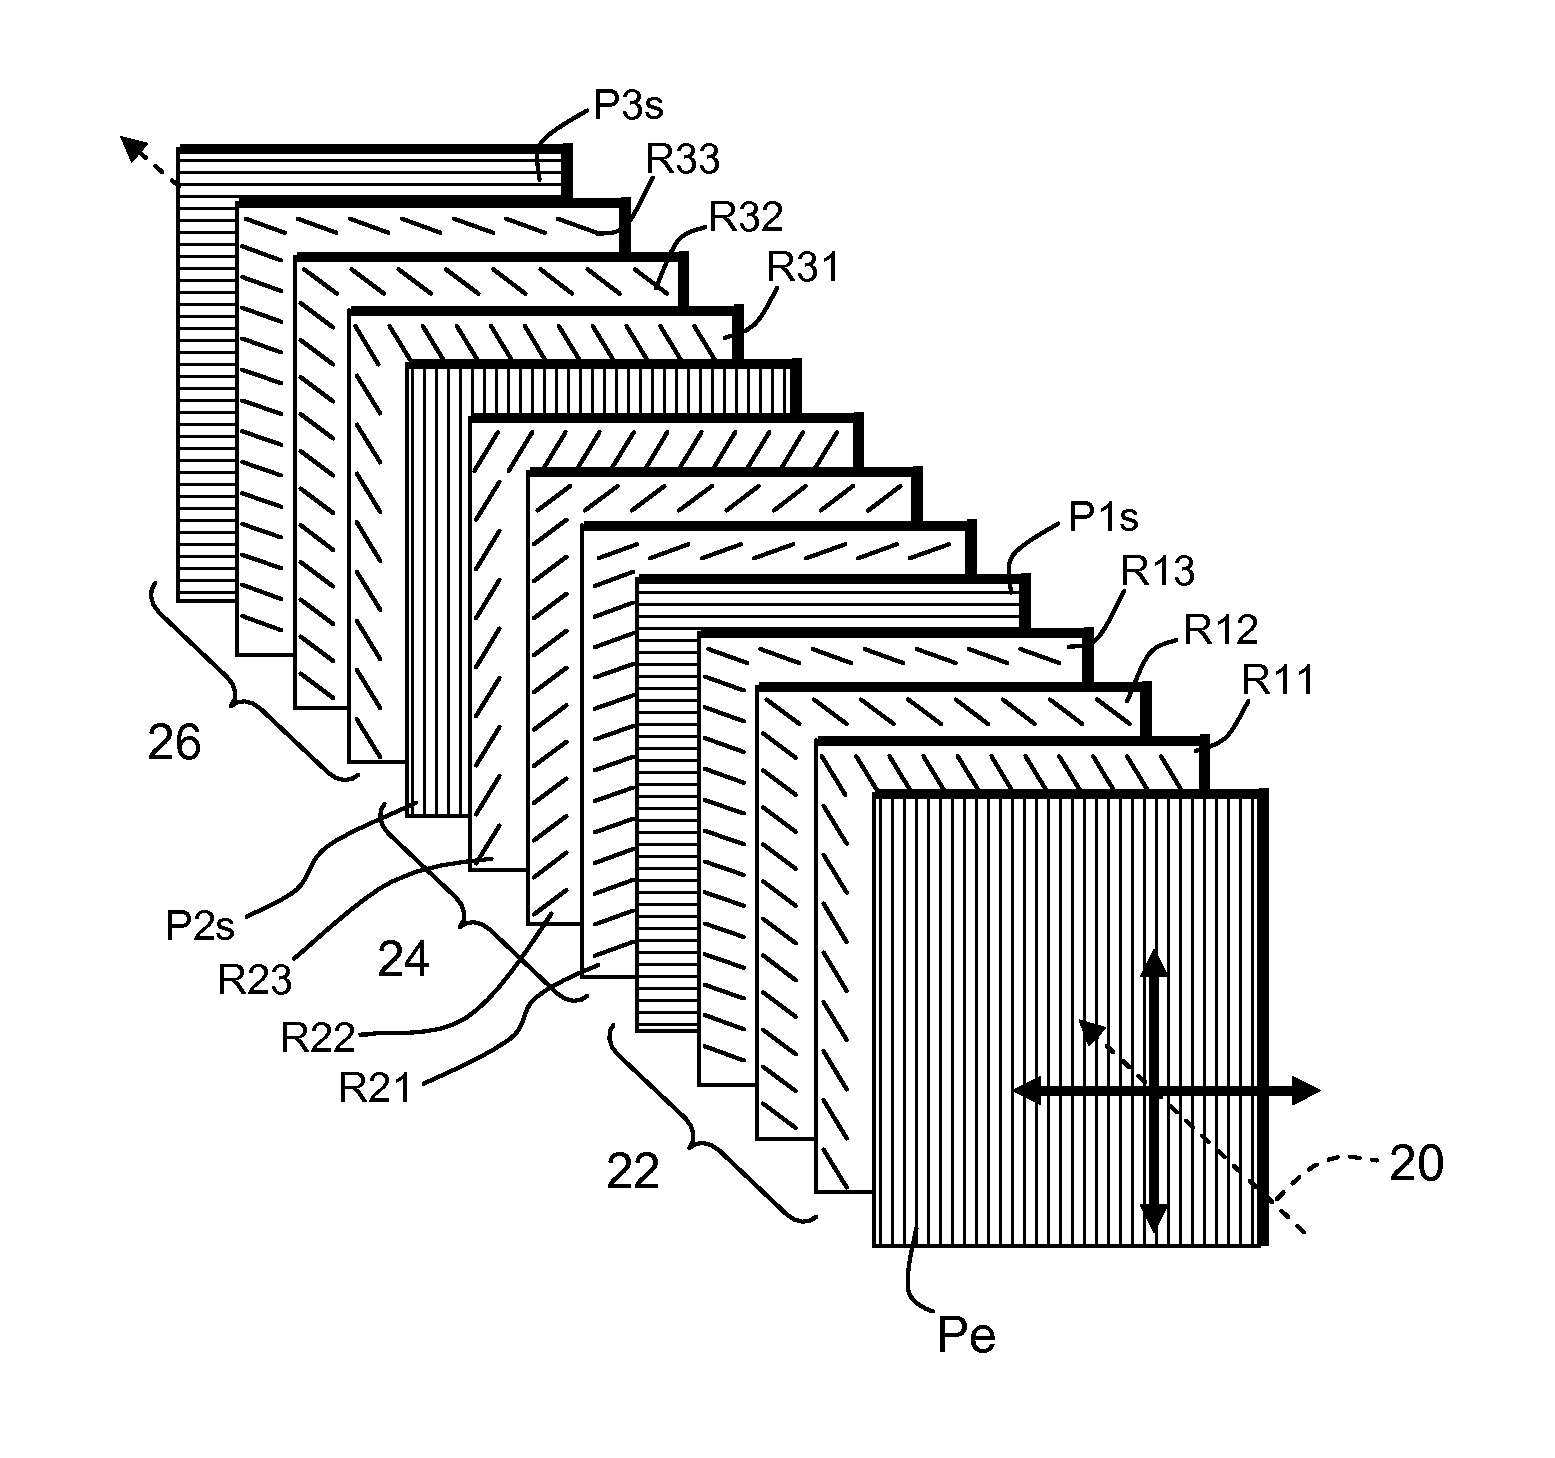 Optical birefringence filters with interleaved absorptive and zero degree reflective polarizers